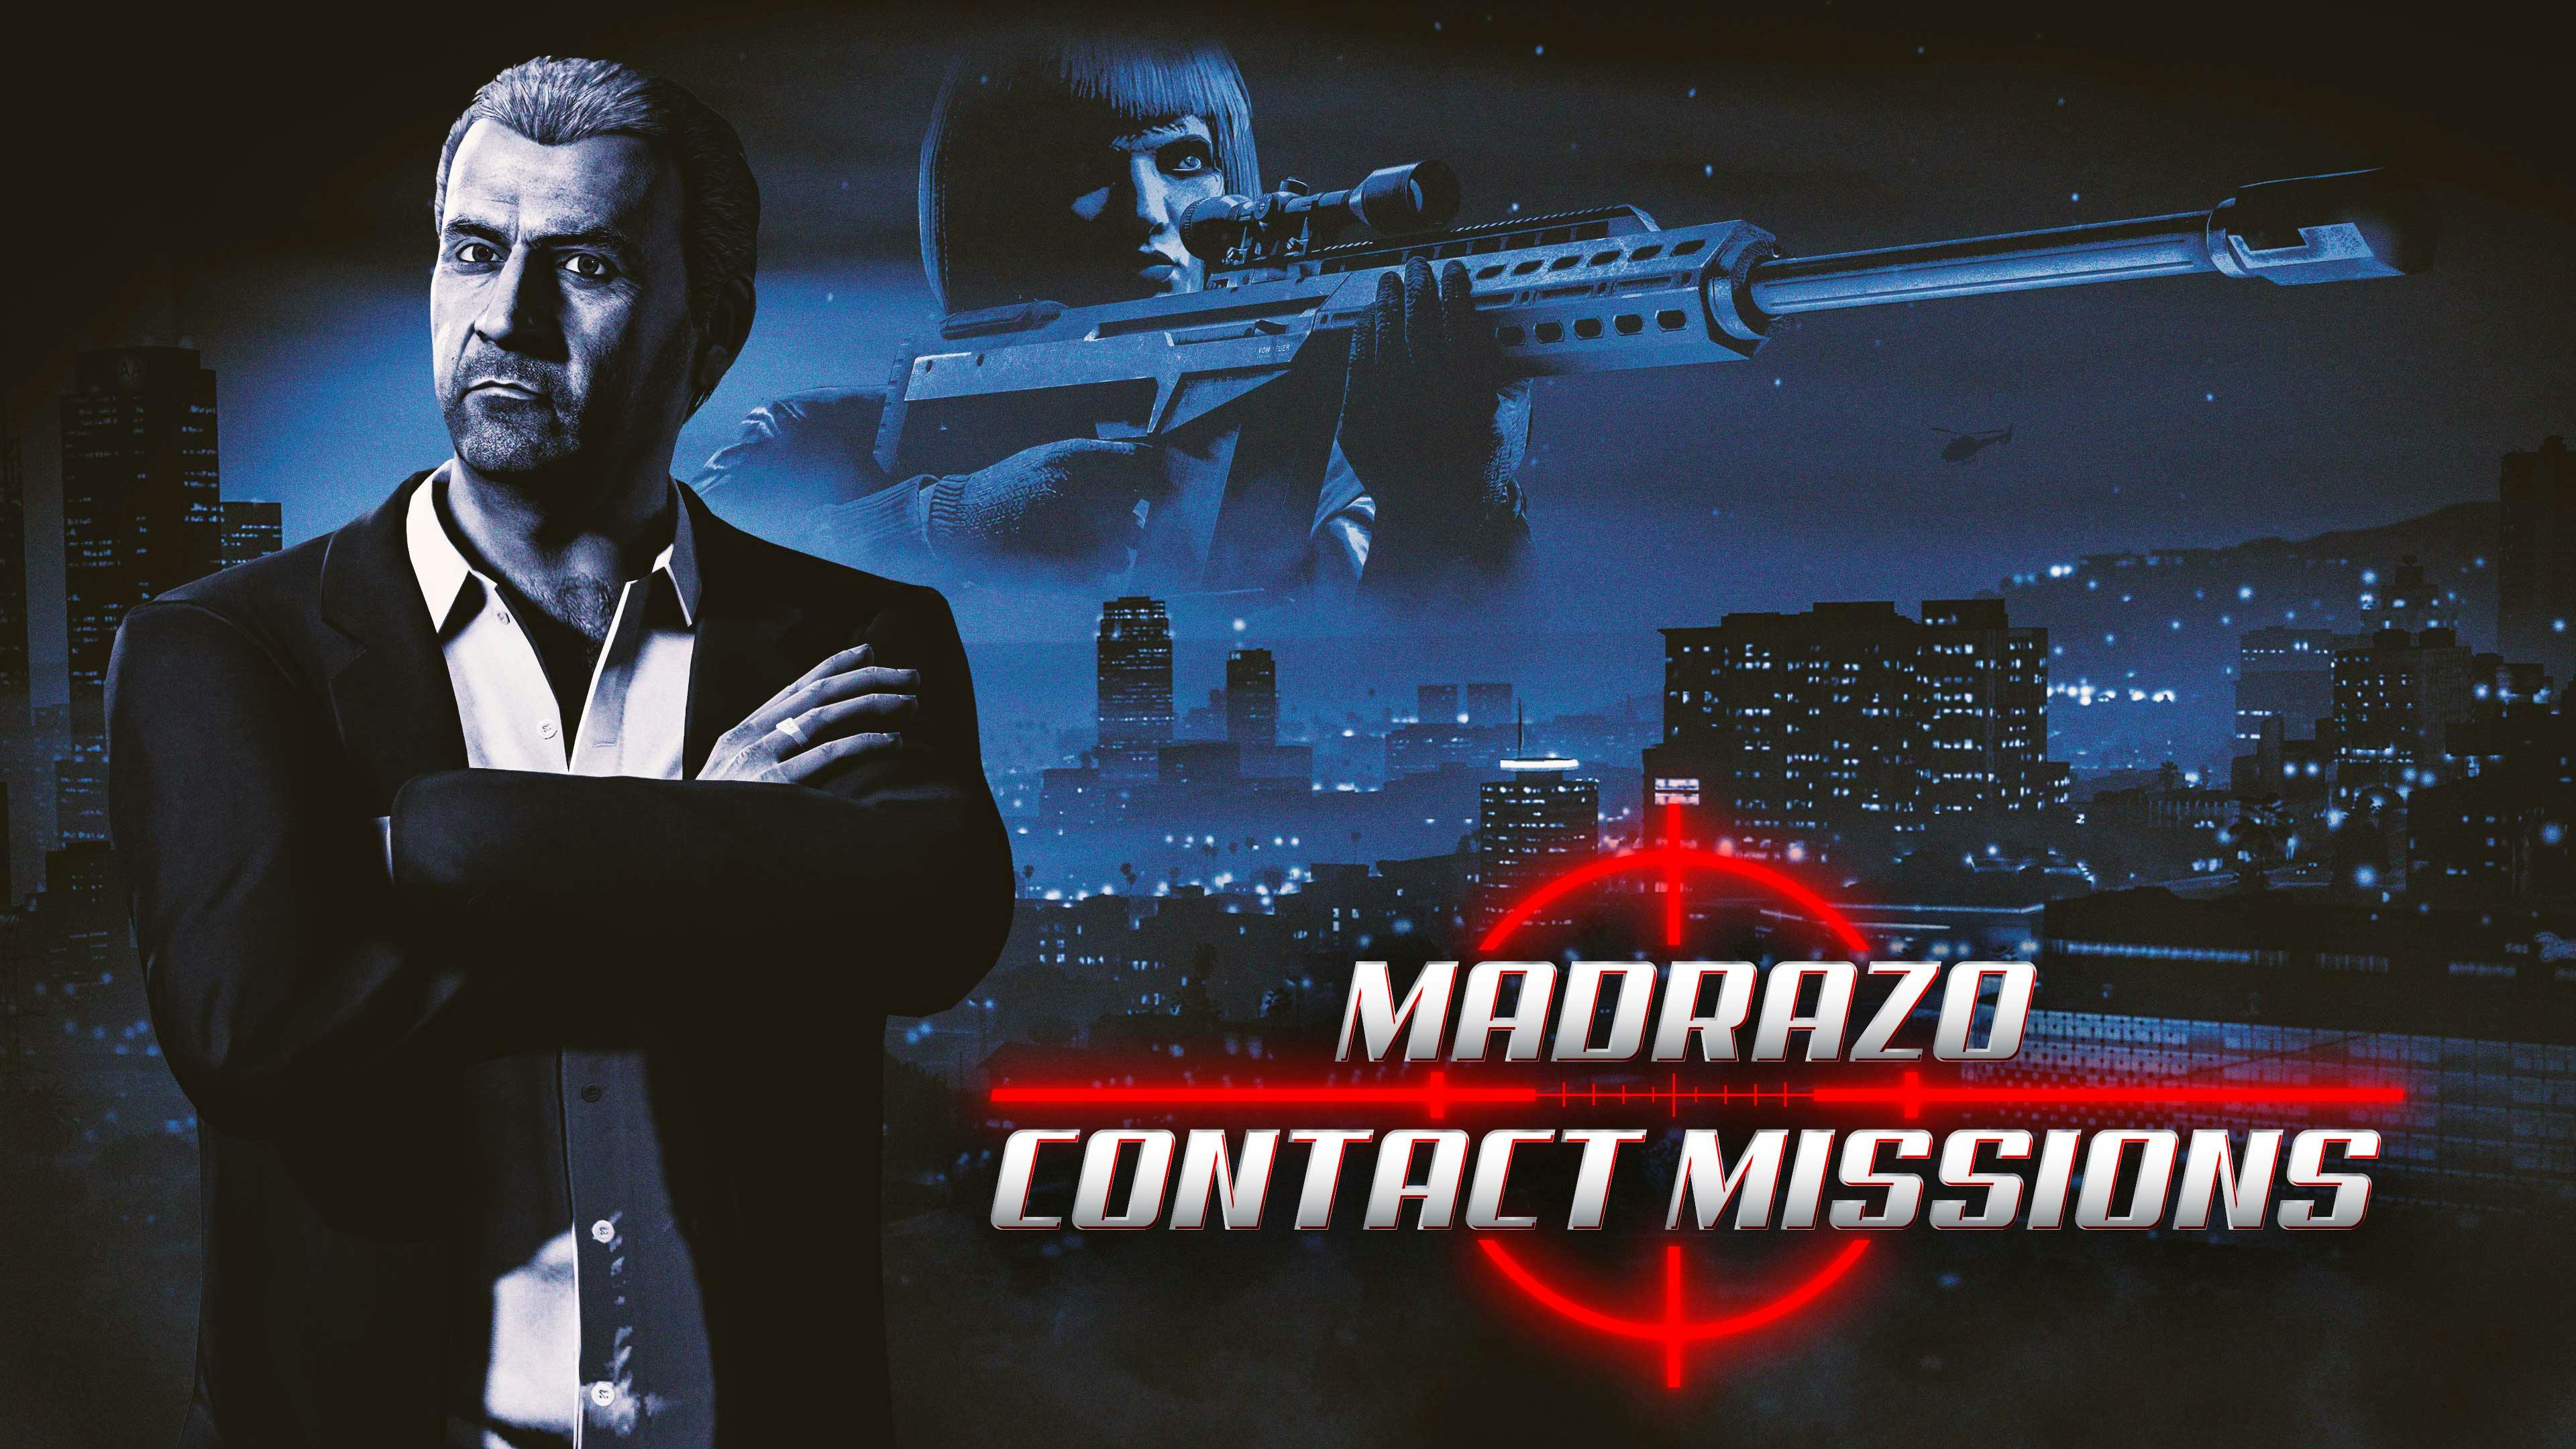 Martin Madrazo Contact Missions in GTA Online